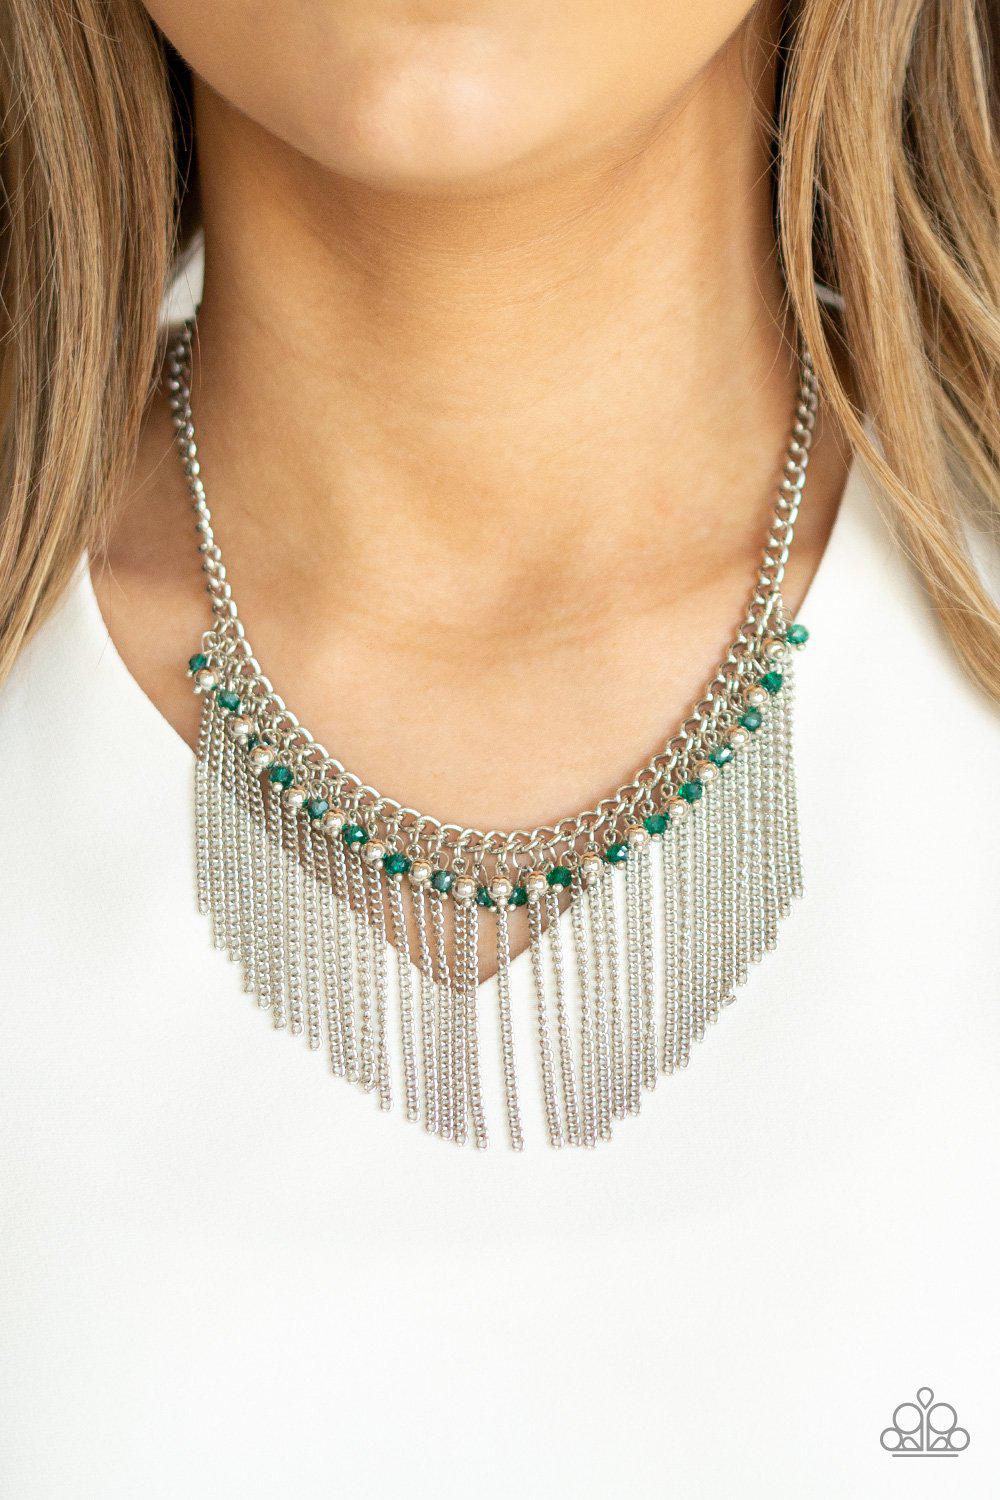 Divinely Diva Green and Silver Necklace - Paparazzi Accessories - model -CarasShop.com - $5 Jewelry by Cara Jewels